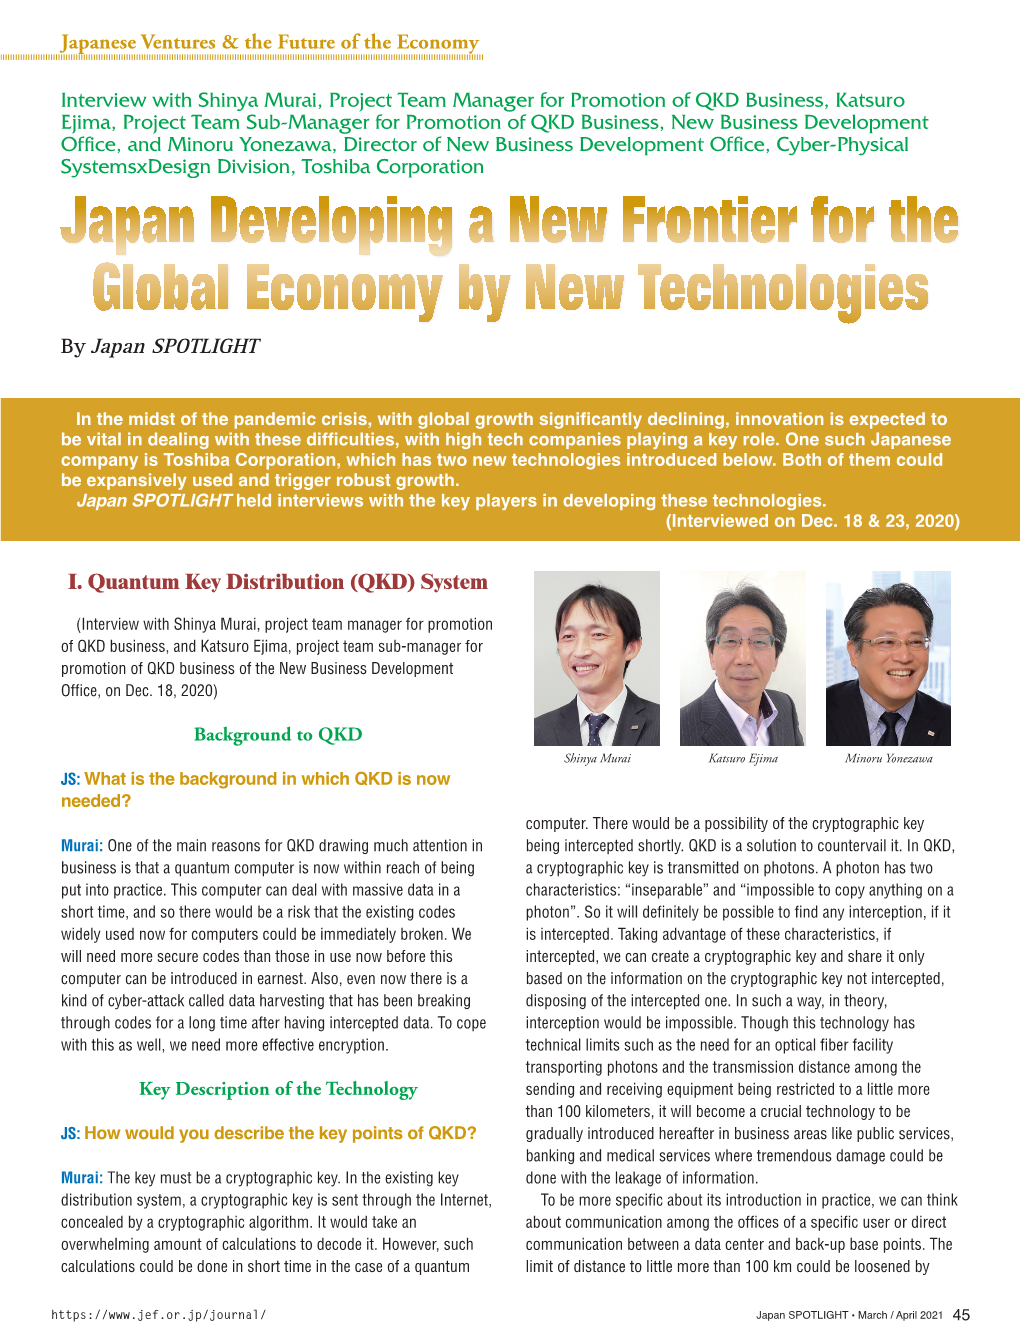 Japan Developing a New Frontier for the Global Economy by New Technologies by Japan SPOTLIGHT